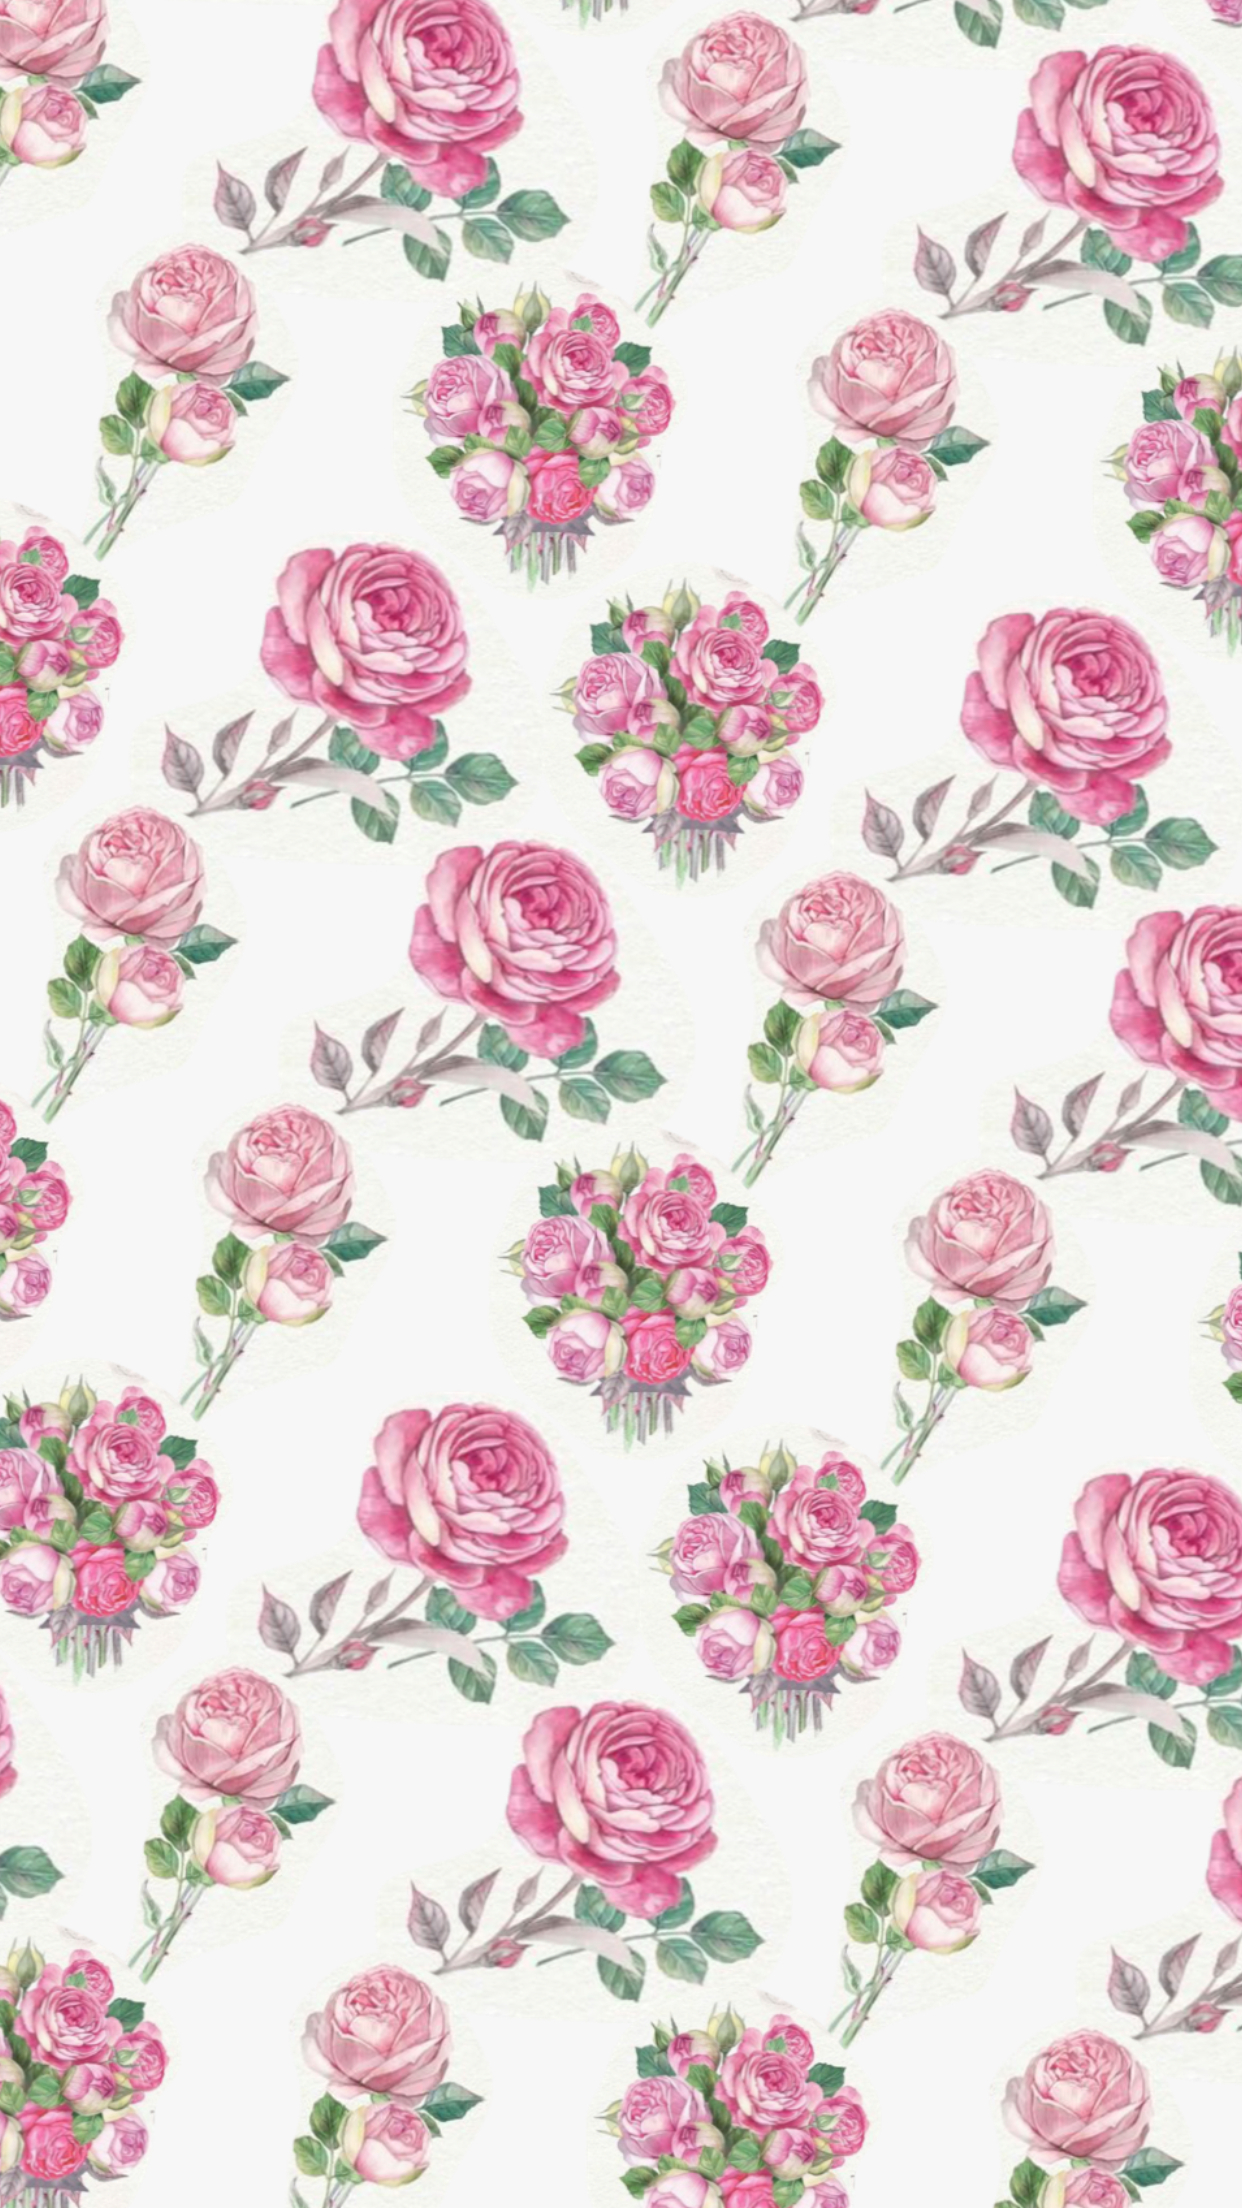 1242x2208 Pin by noir et violet on Wallpapers Flowers | Vintage flowers wallpaper, Flowery wallpaper, Flower phone wallpaper